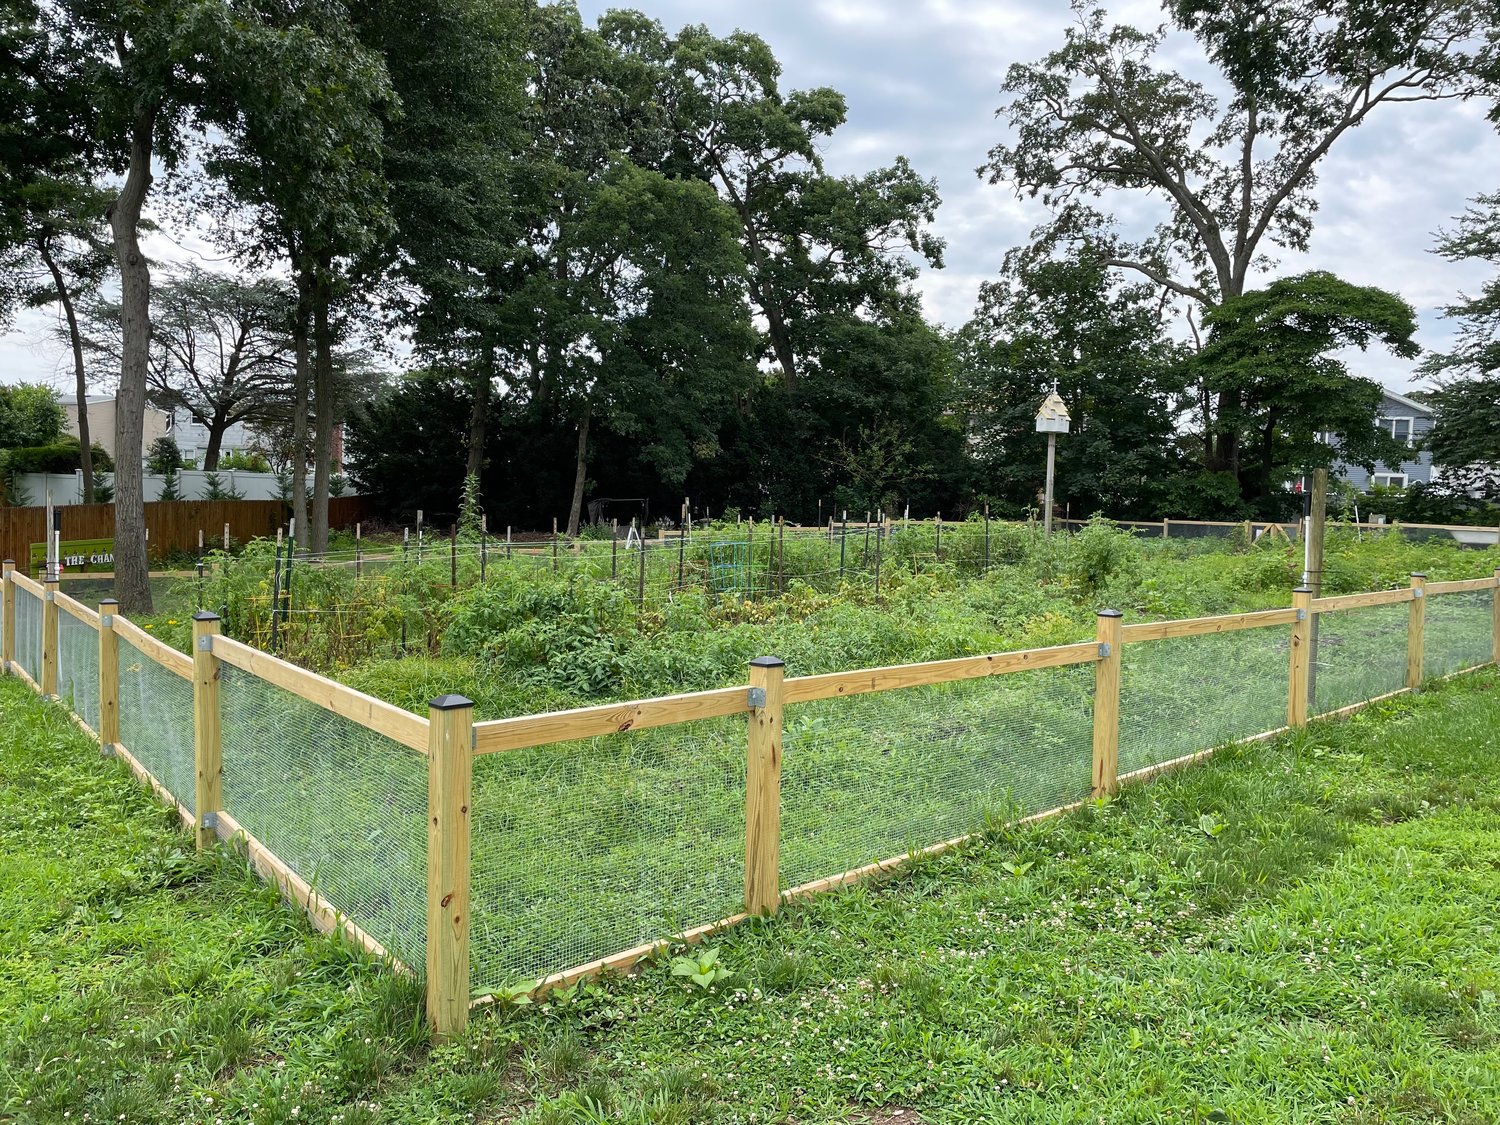 Outside, the rows of fresh produce, flowers and other plants are protected from rabbits by a recently installed fence.